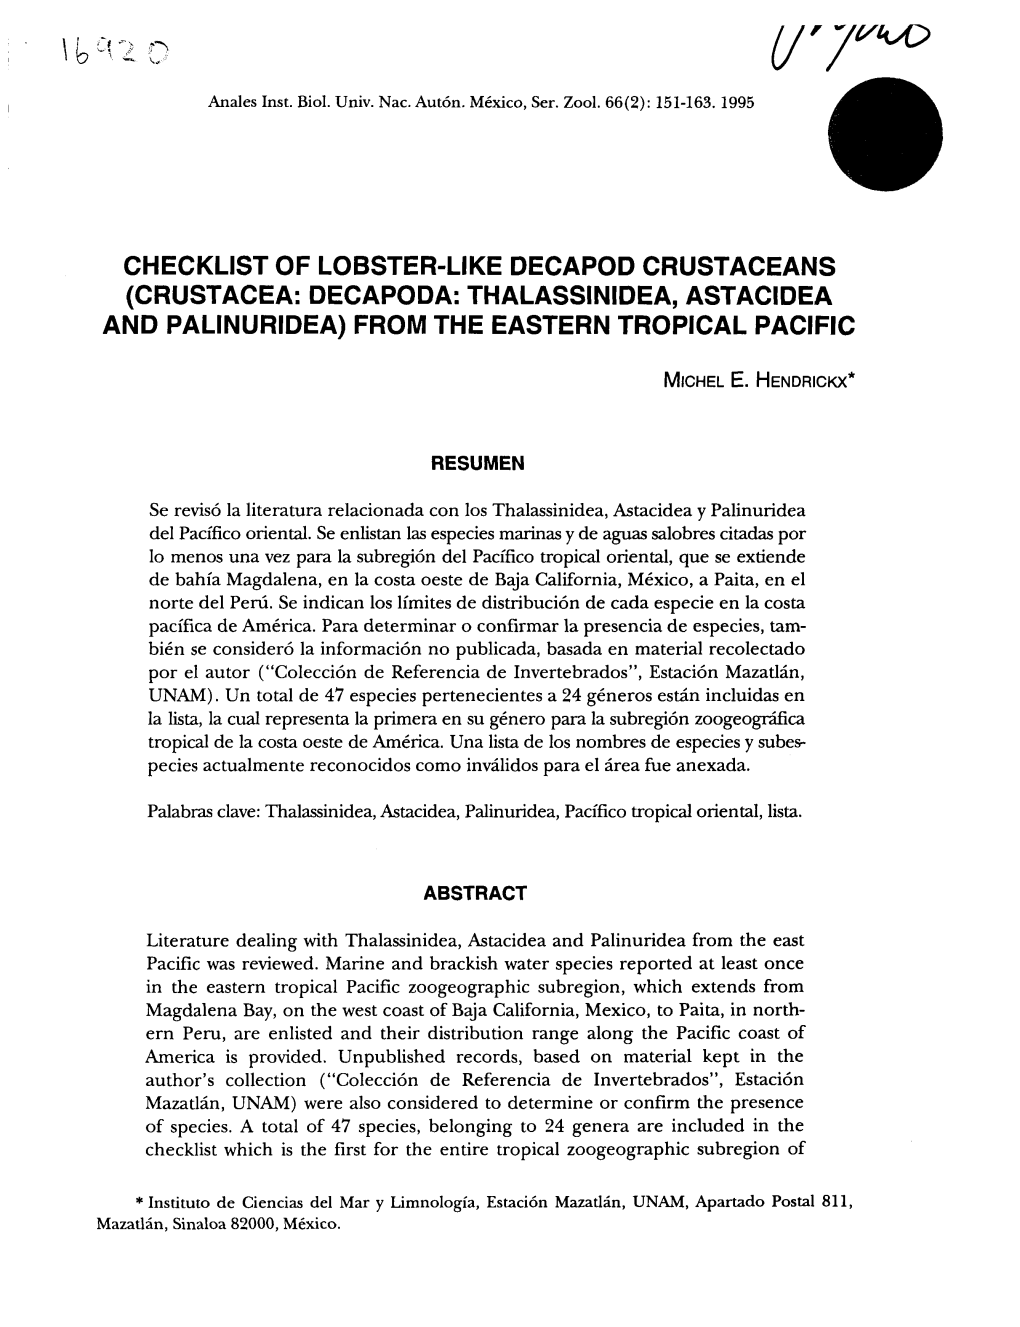 Checklist of Lobster-Like Decapod Crustaceans (Crustacea: Decapoda: Thalassinidea, Astacidea and Palinuridea) from the Eastern Tropical Pacific